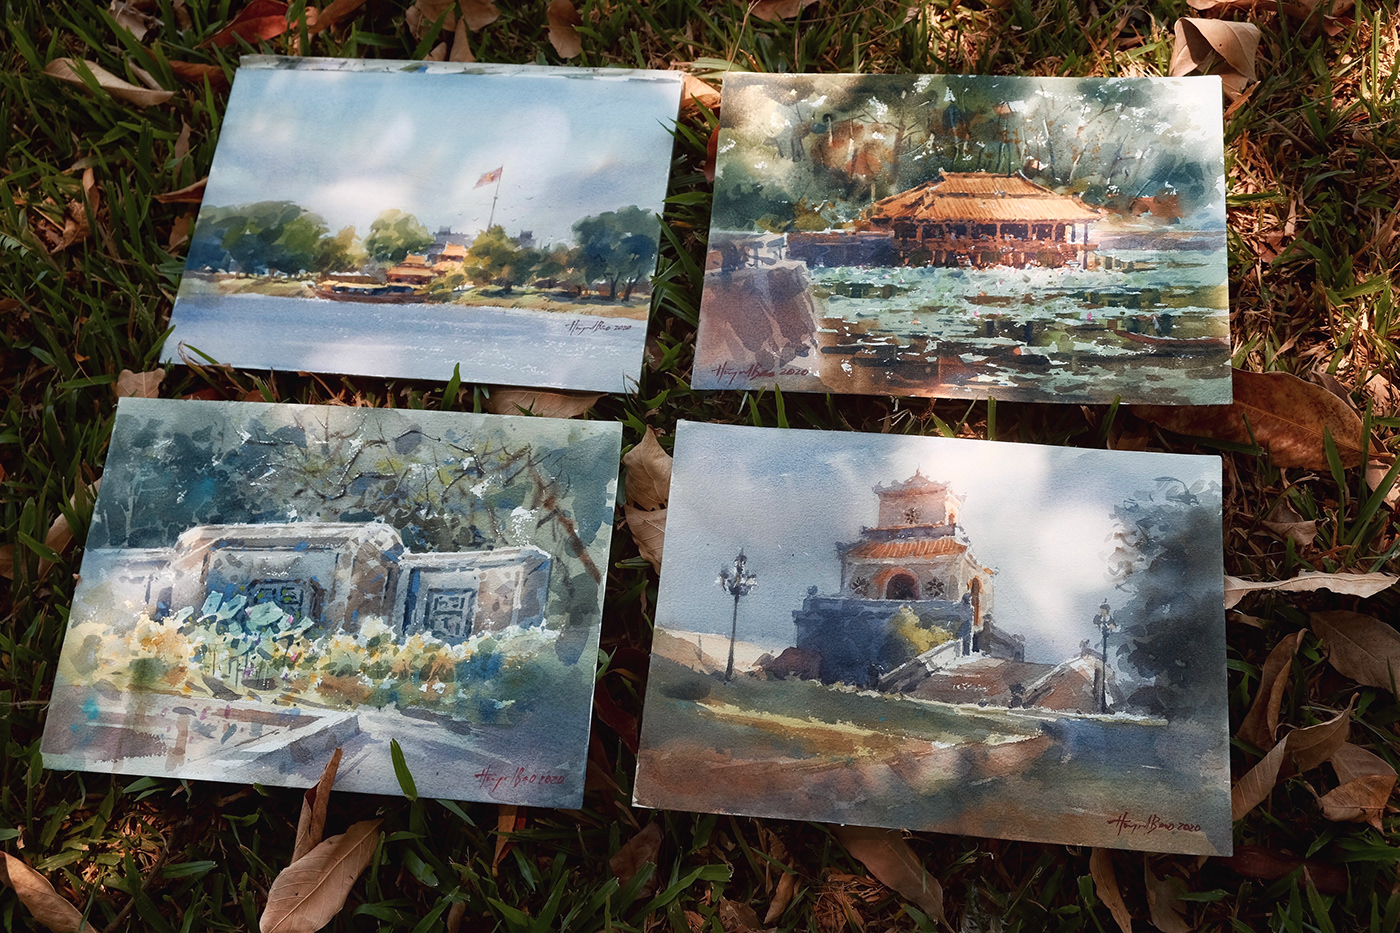 Plein Air Painting - Bao Huynh Watercolor on Behance